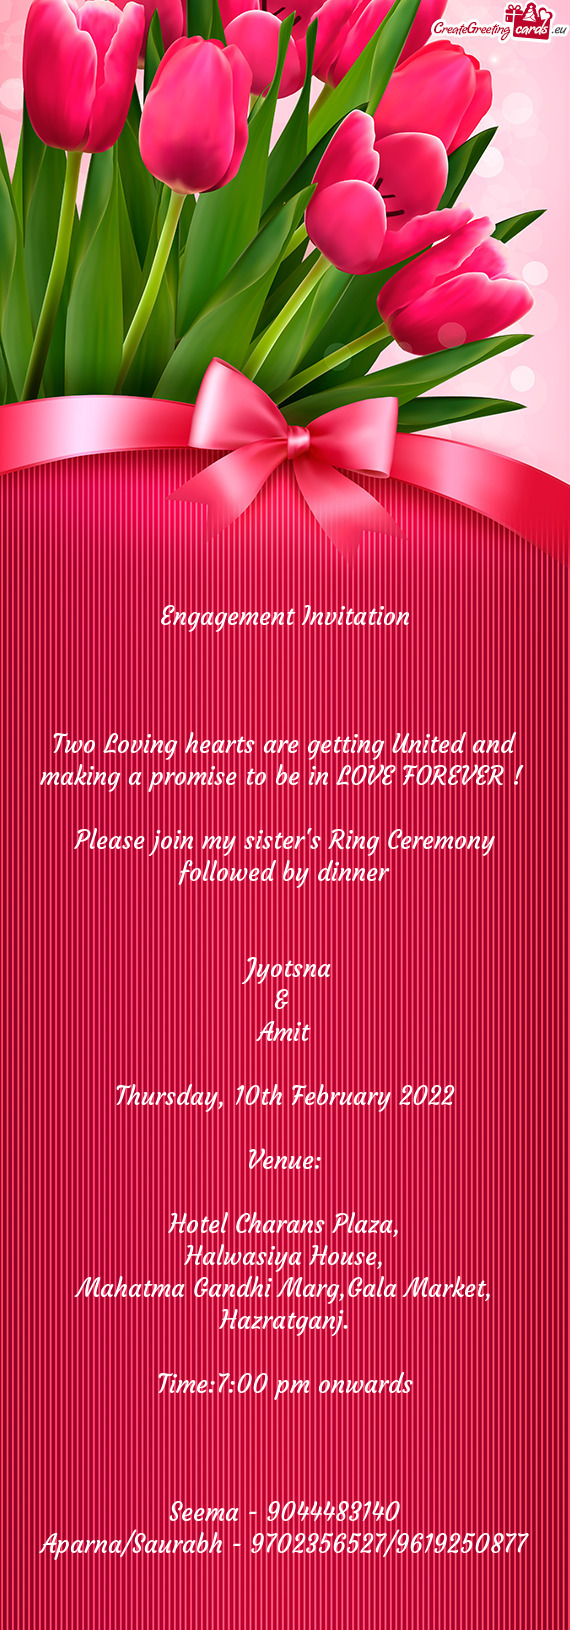 Please join my sister